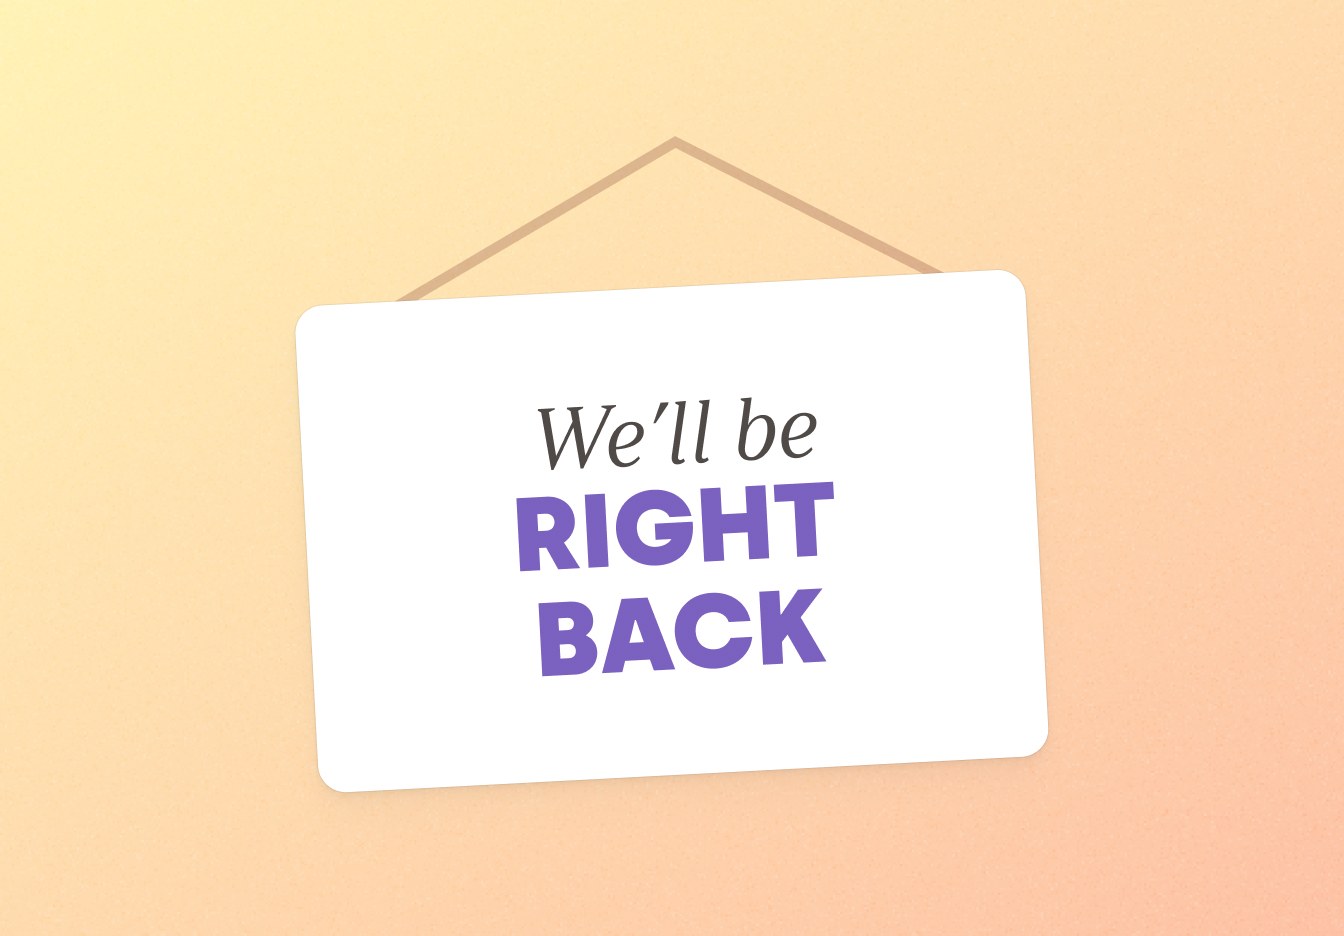 Illustration of a hanging 'We'll be right back' sign.